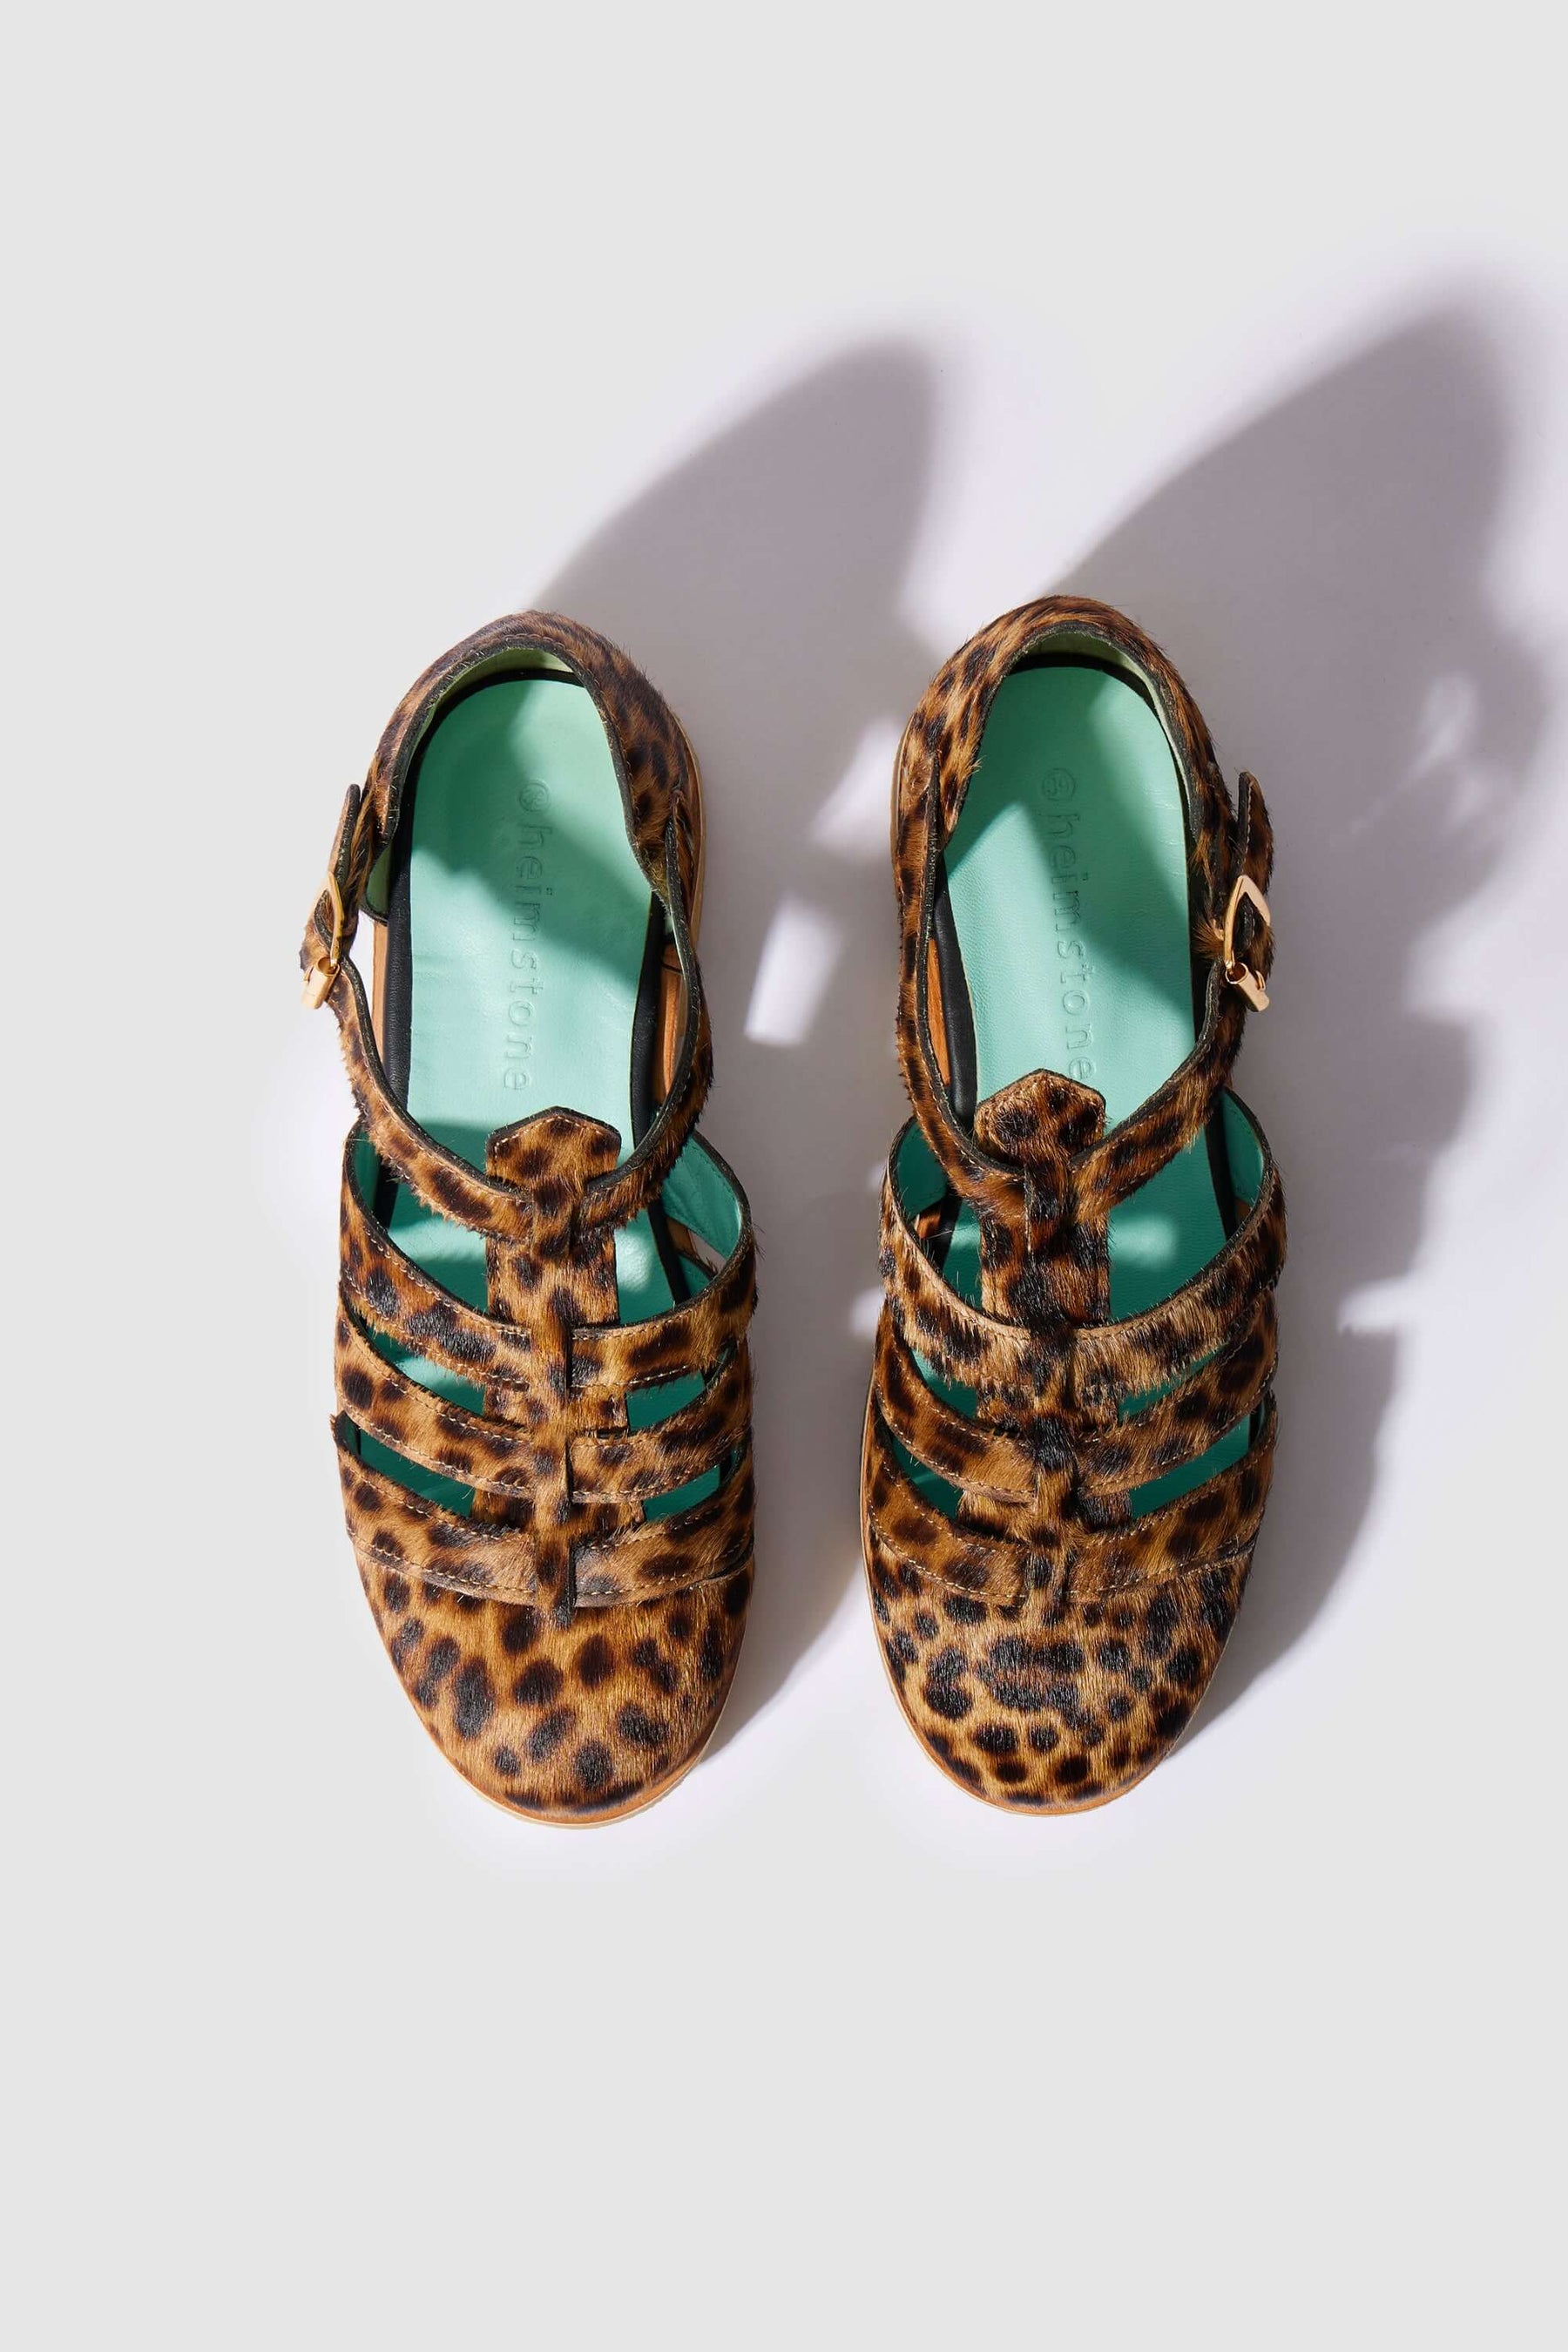 Ricky sandals in Leopard printed leather